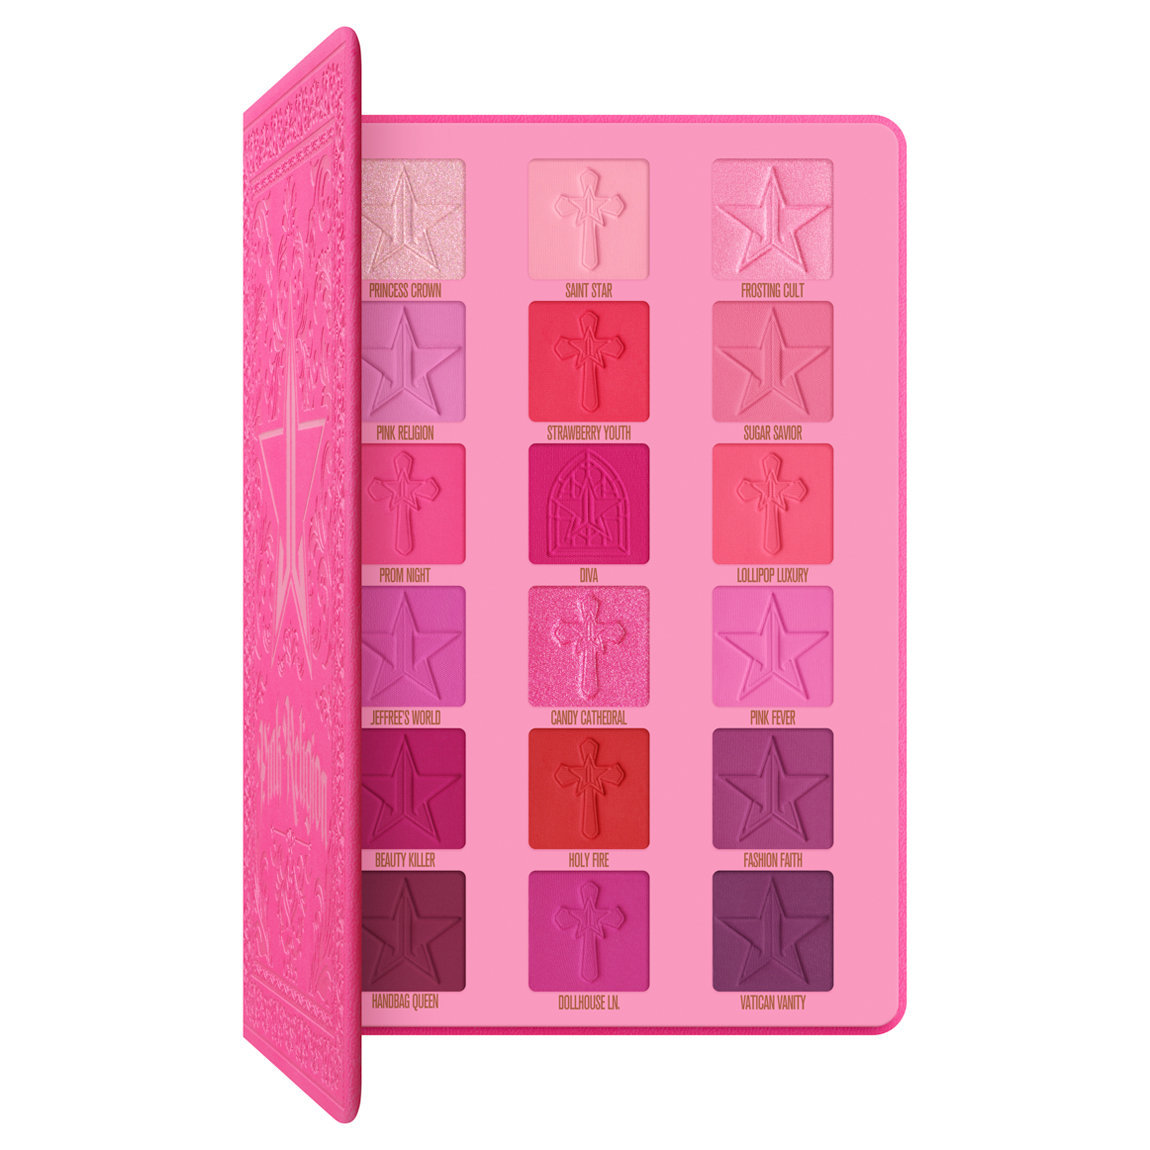 Jeffree Star Cosmetics Pink Religion Palette alternative view 1 - product swatch.